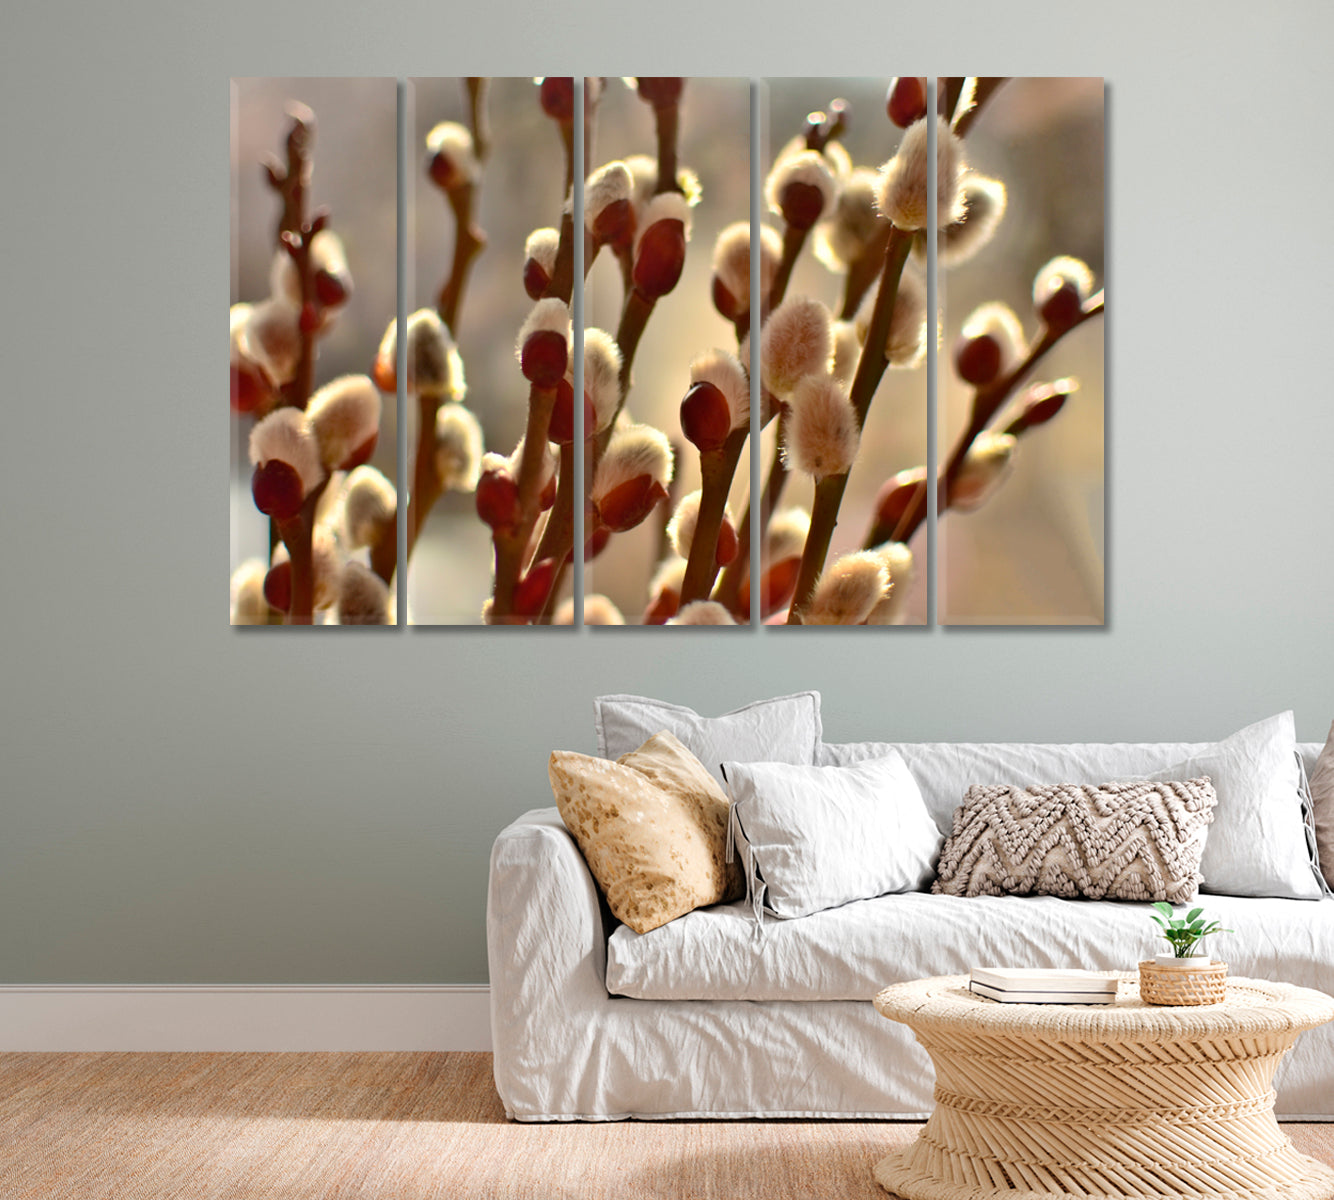 Willow Branches Wall Canvas Art Print-Canvas Print-CetArt-1 Panel-24x16 inches-CetArt